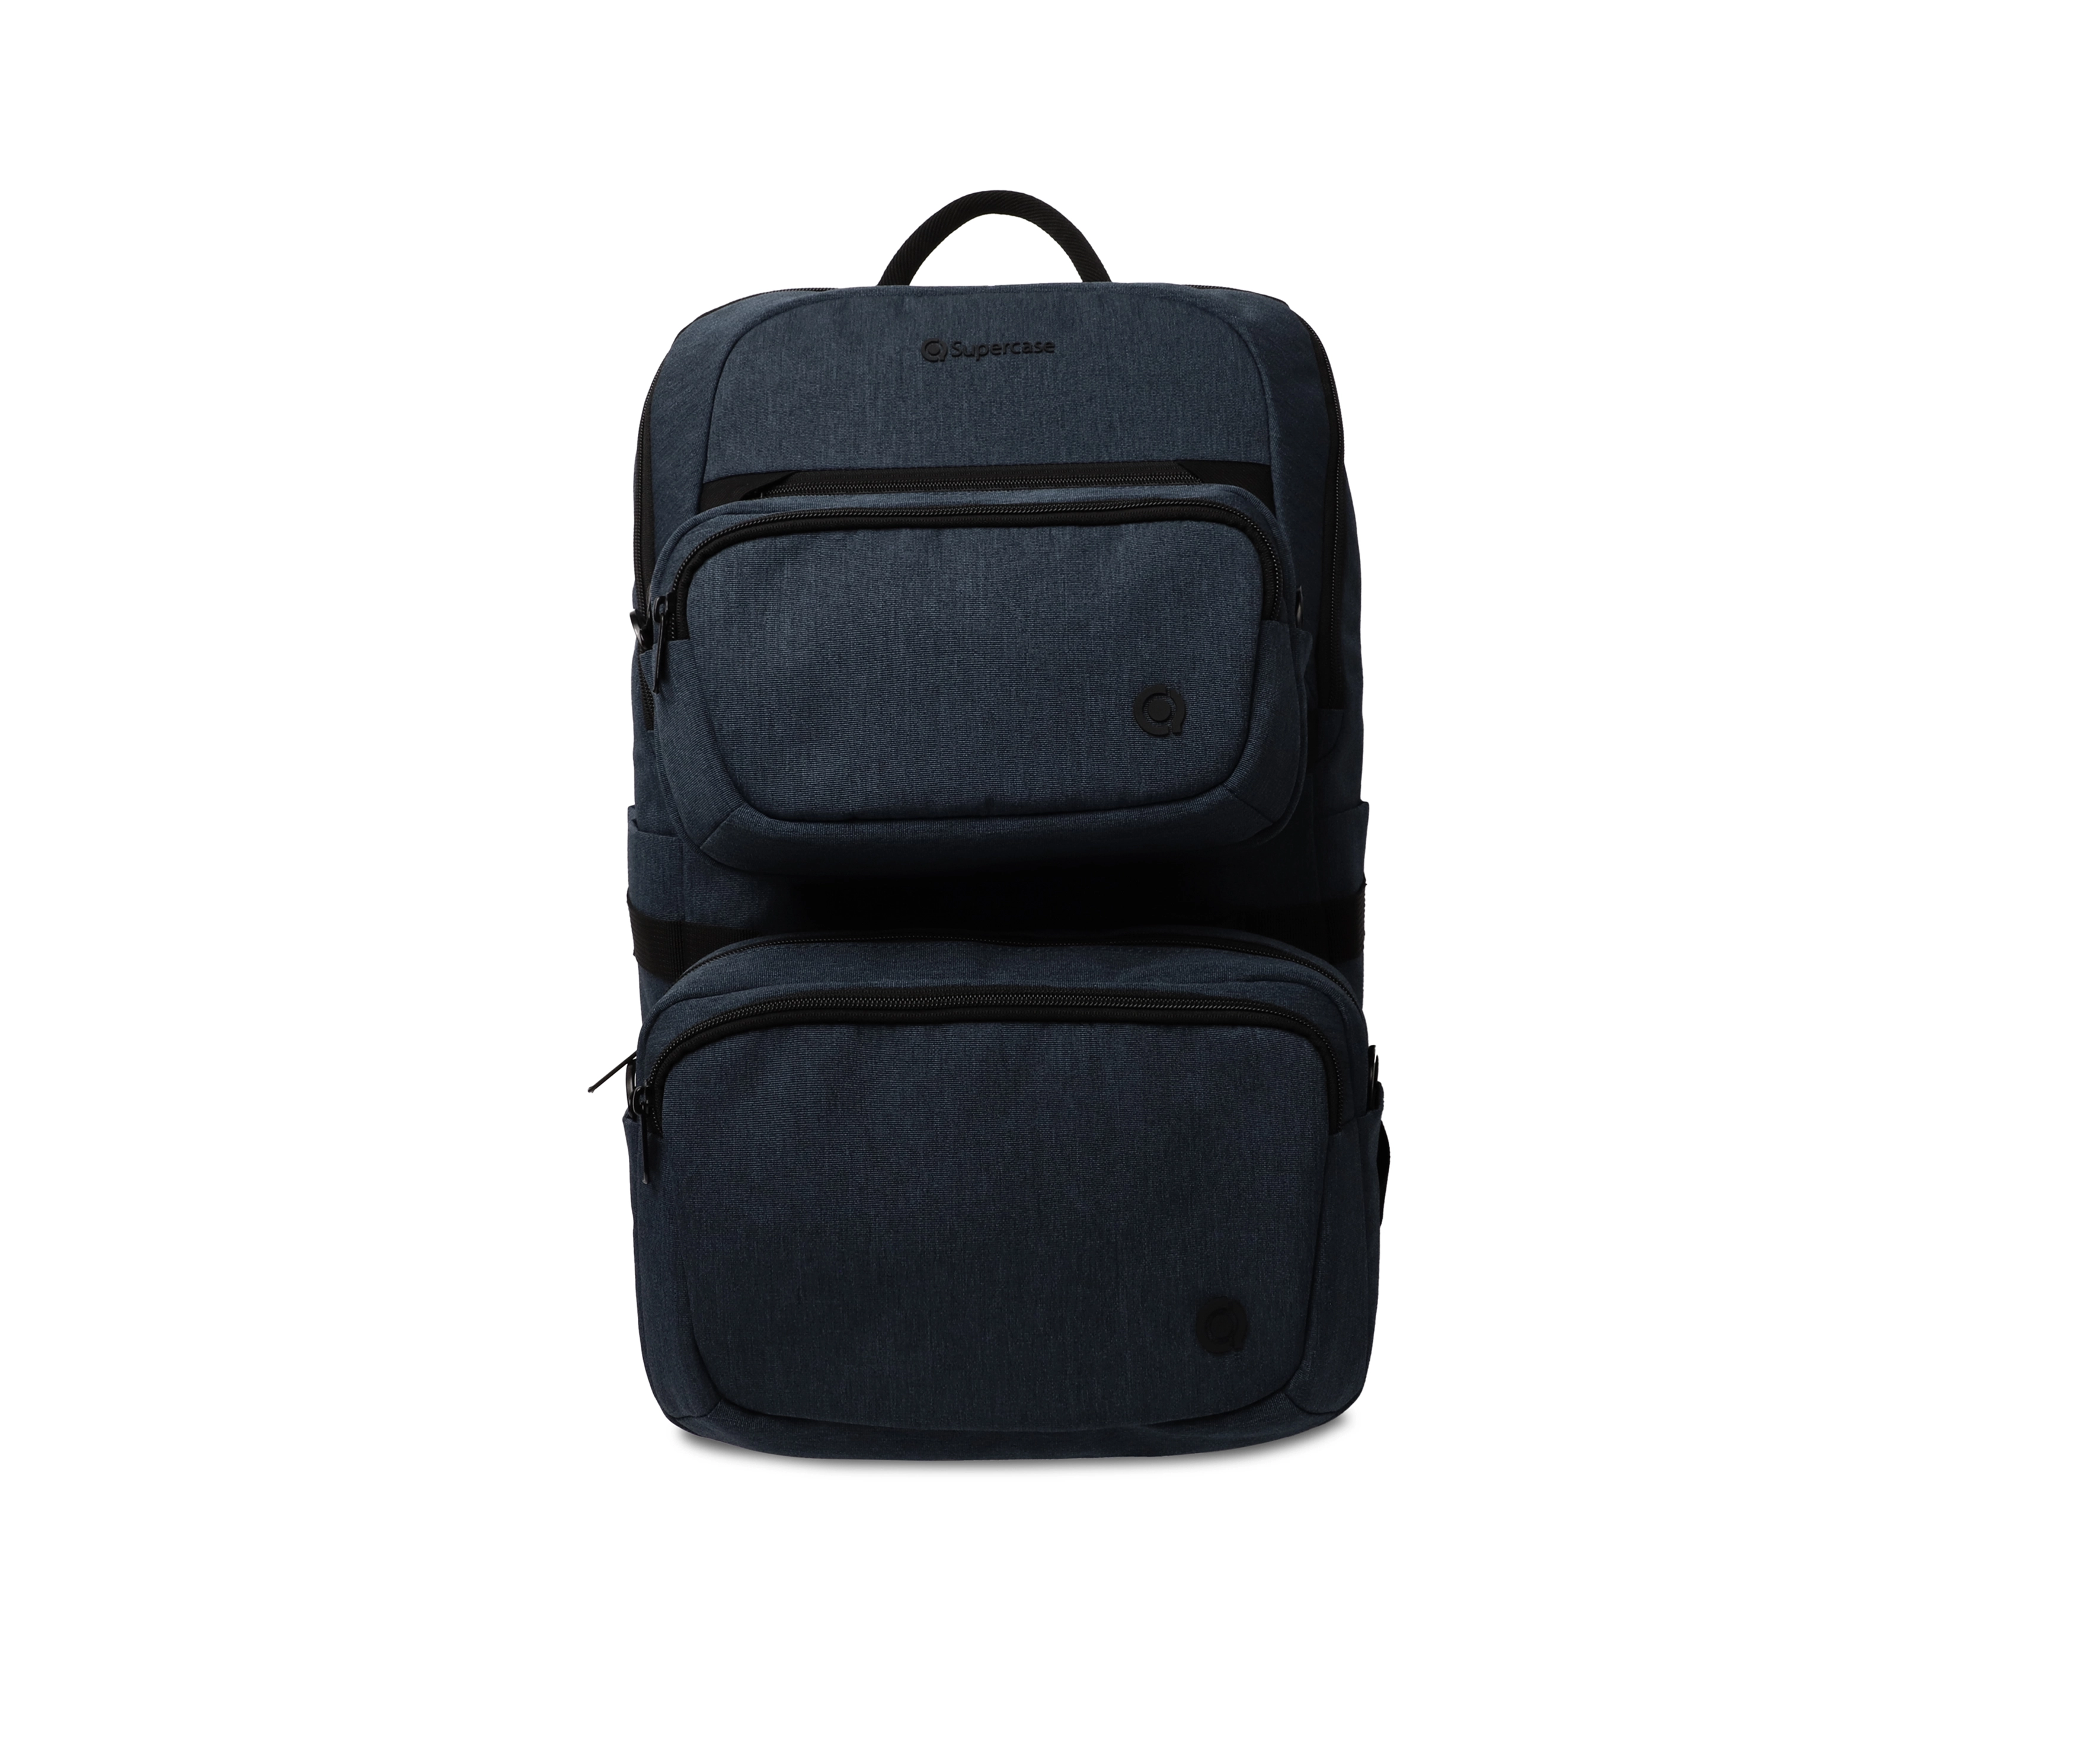 backpack with detachable compartments